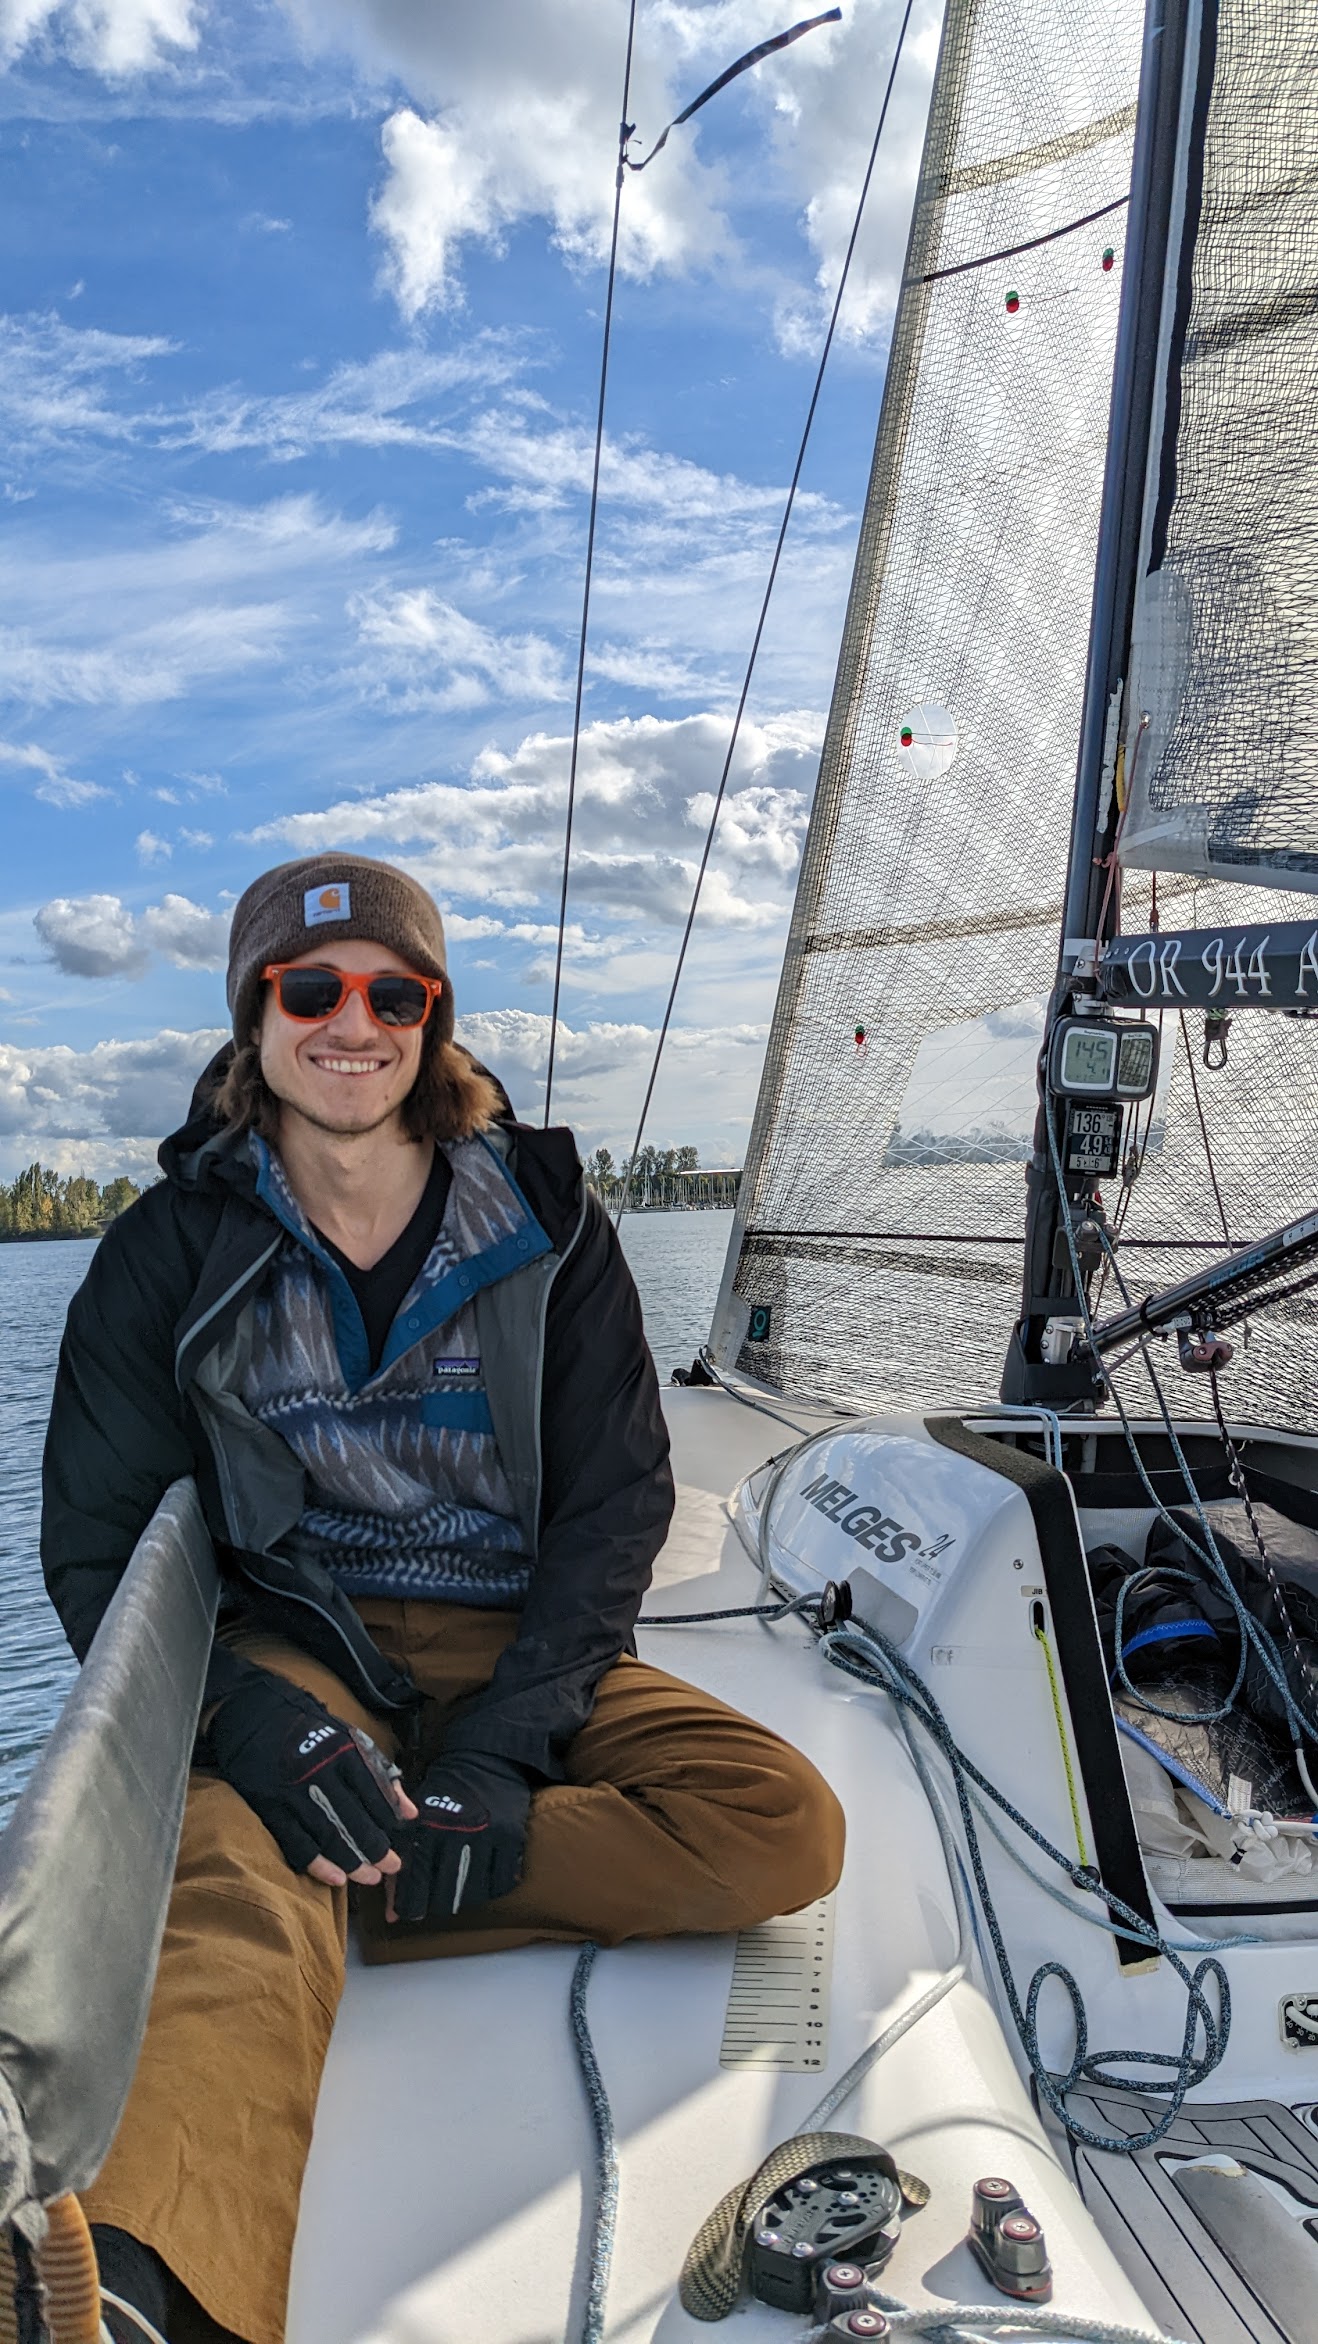 Webmaster on a Melges 24 race boat.